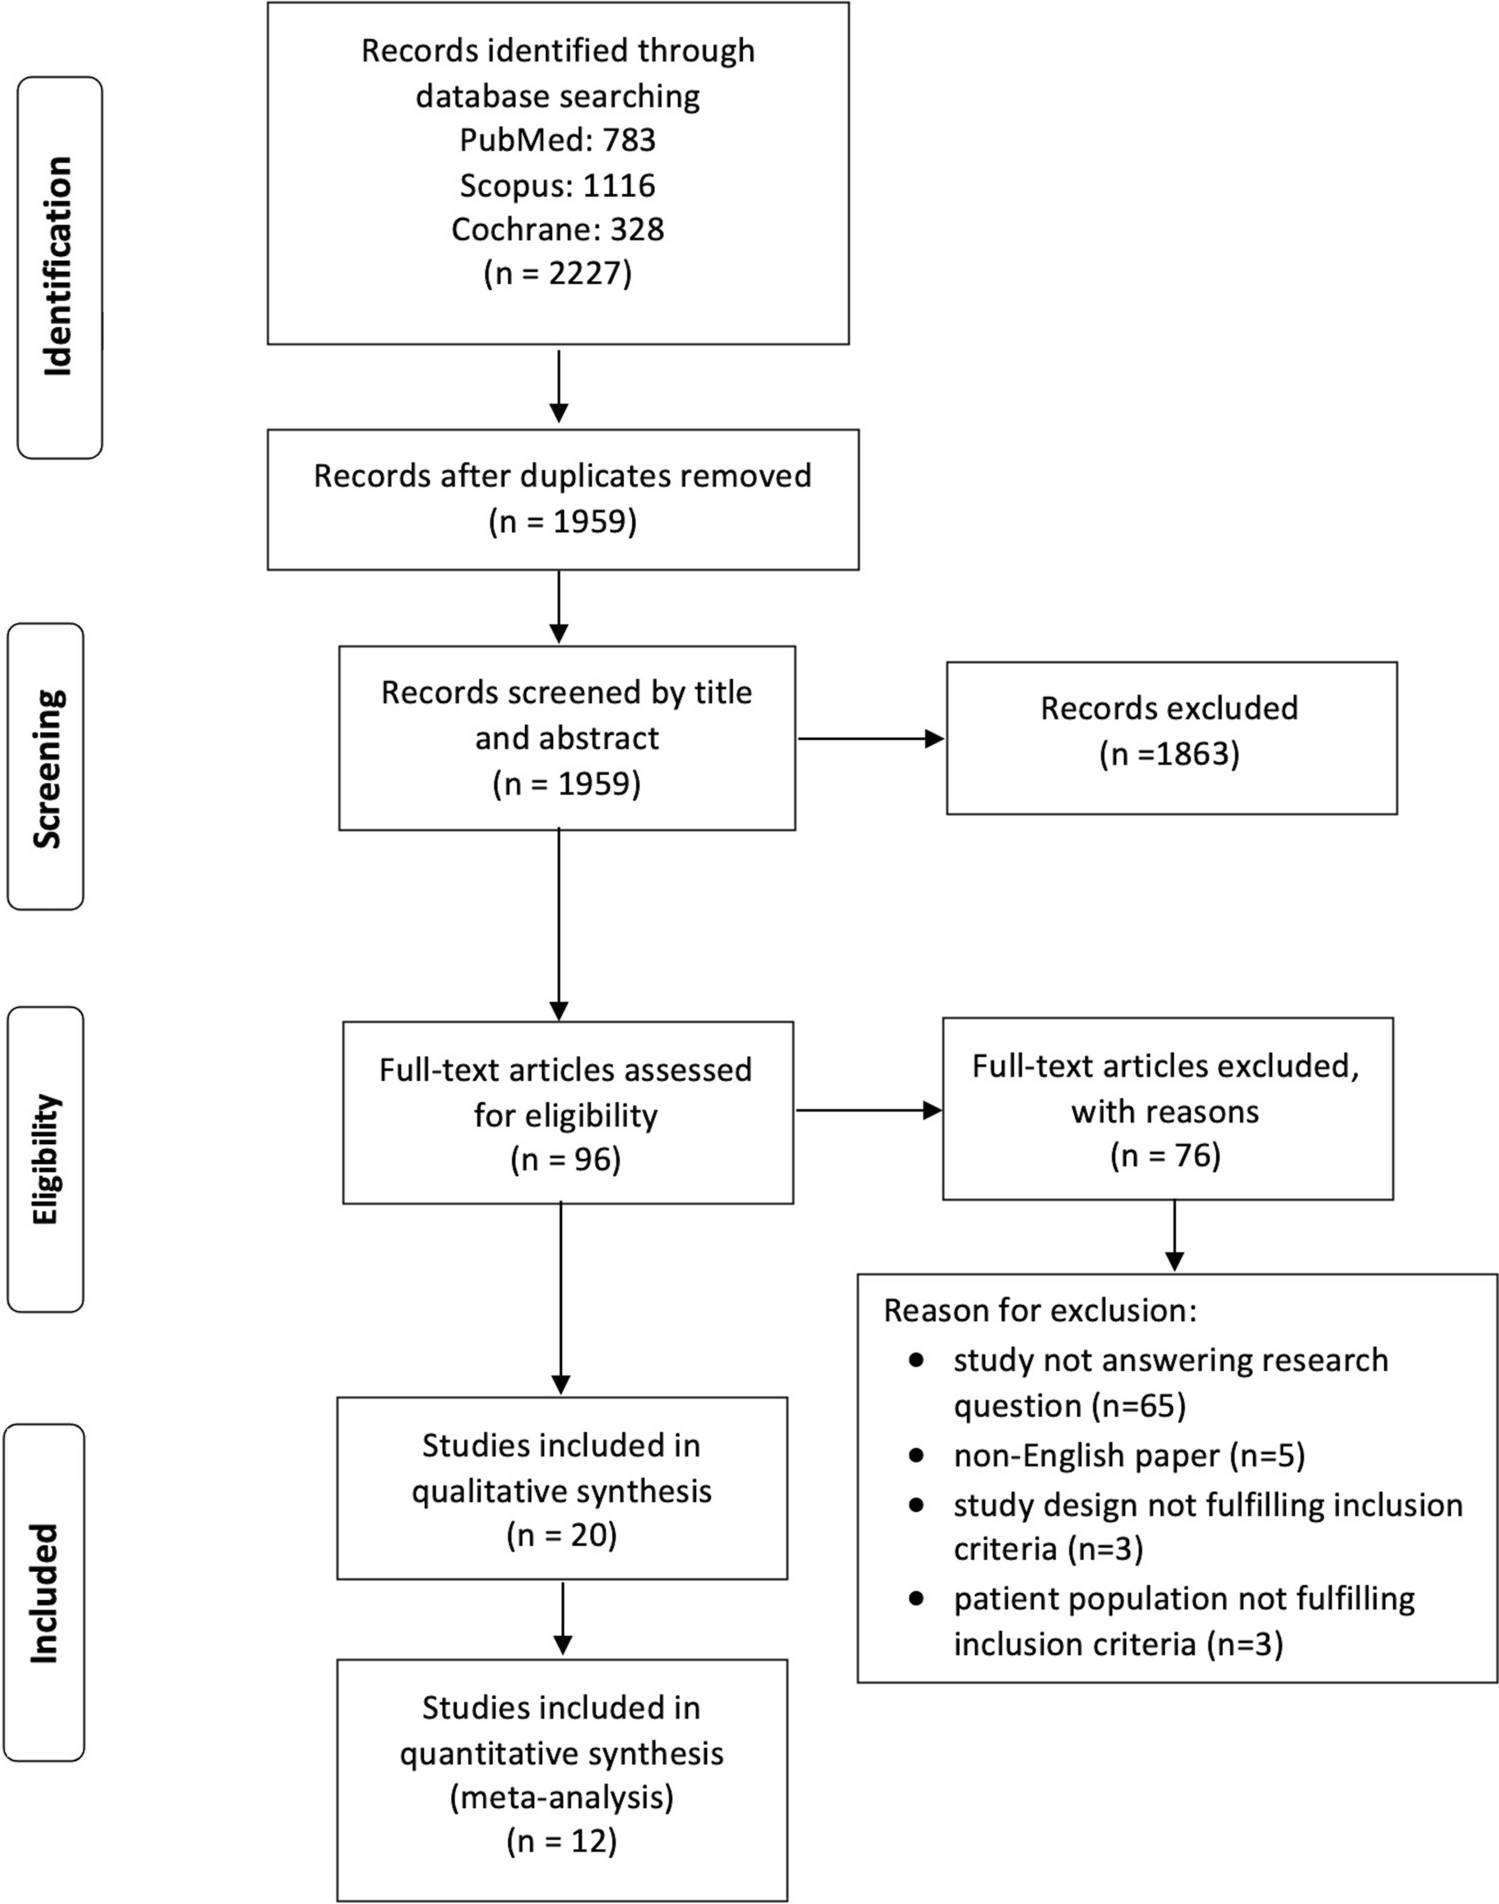 The association of vasomotor symptoms with fracture risk and bone mineral density in postmenopausal women: a systematic review and meta-analysis of observational studies